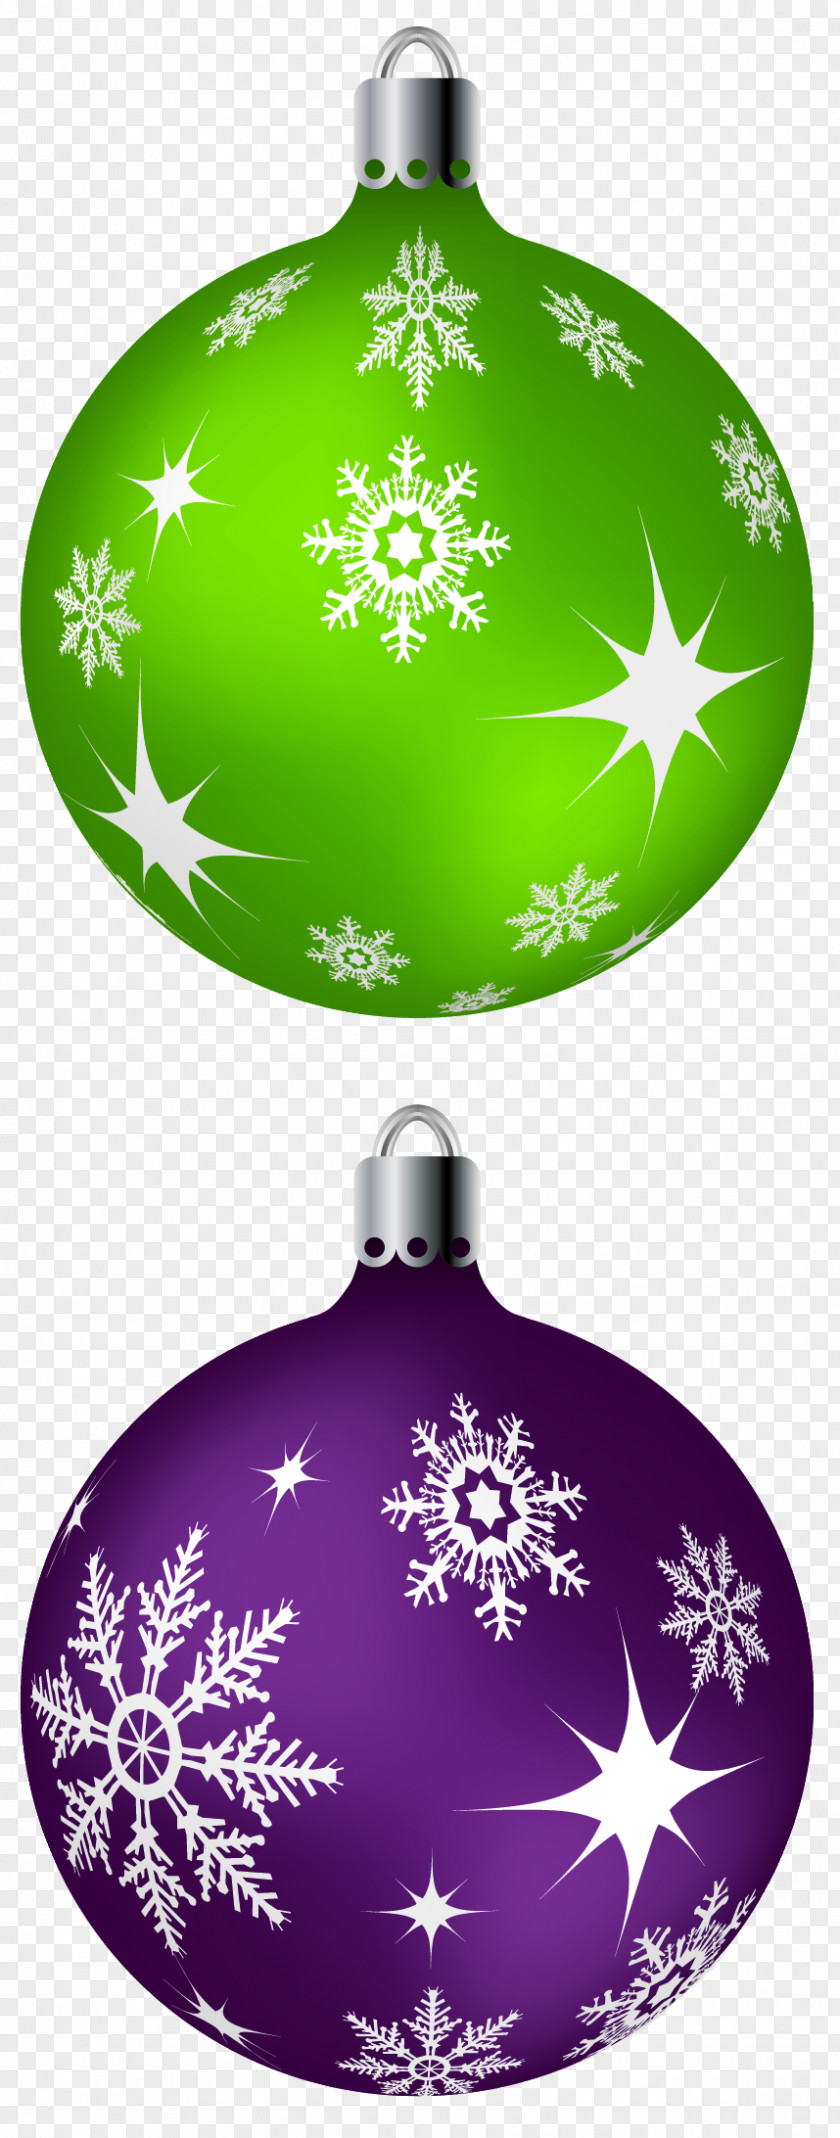 Green And Purple Christmas Balls Clipart Picture Ornament Decoration Clip Art PNG